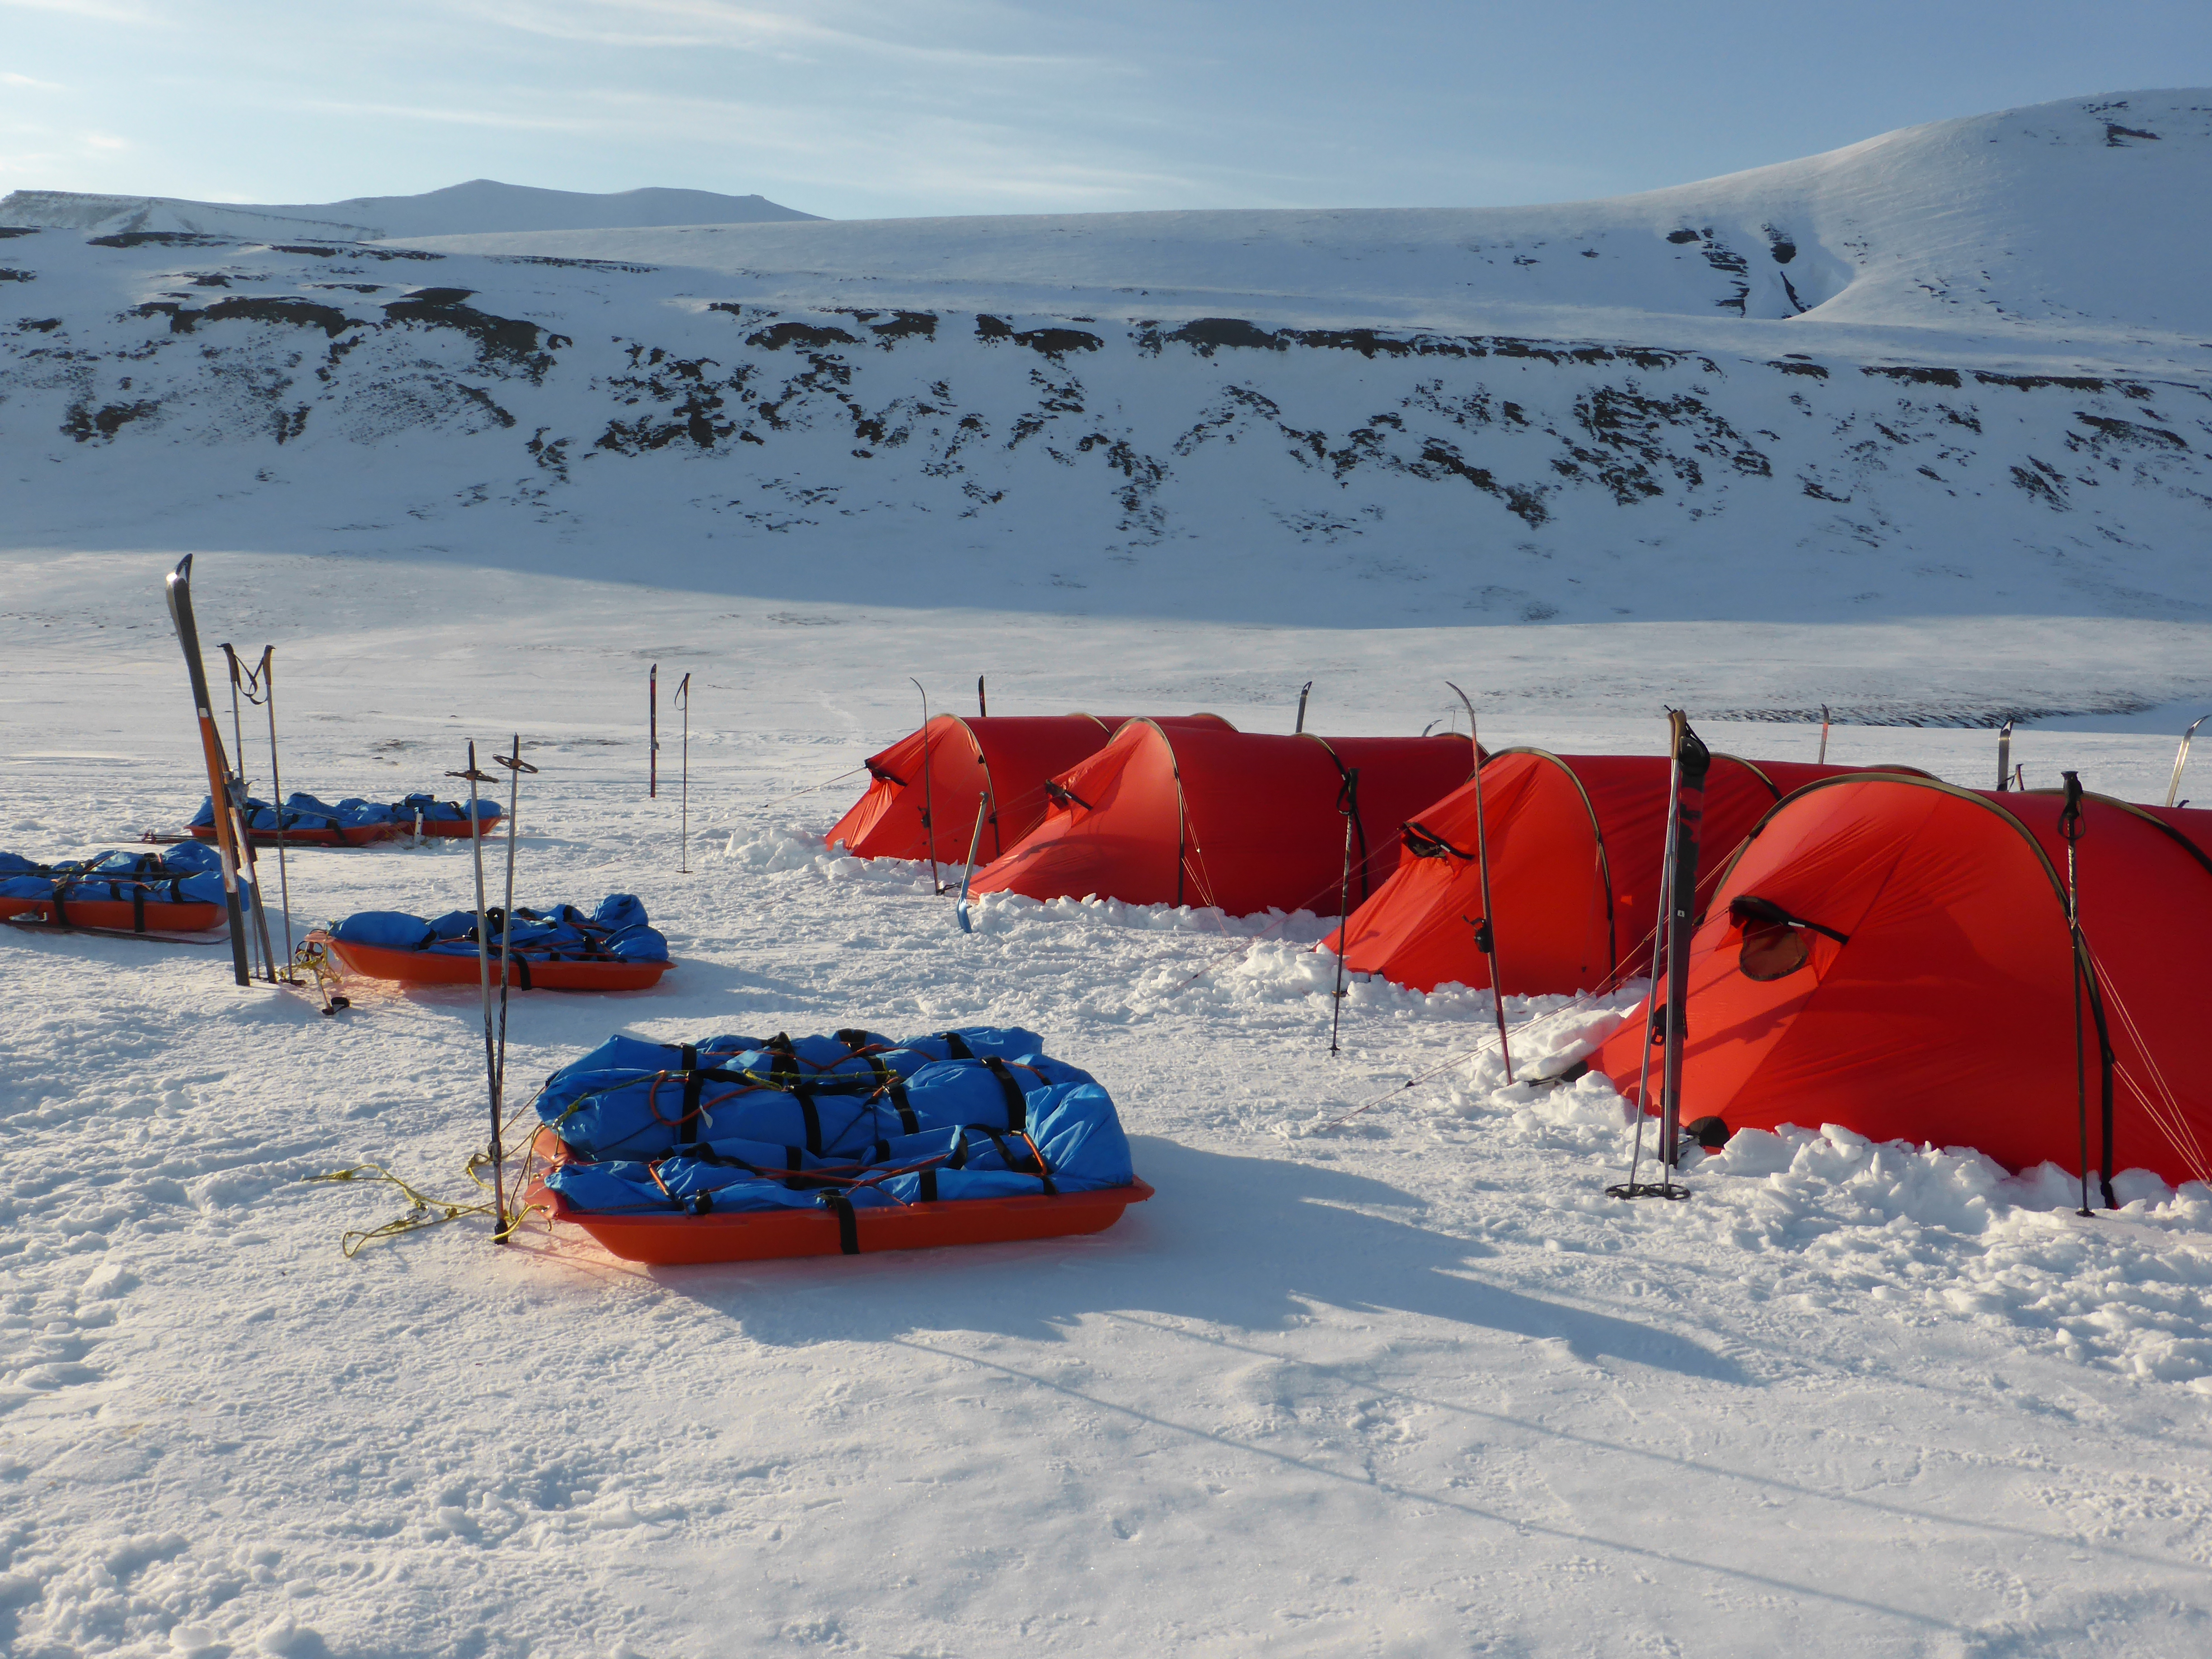 Tents set up for the night in Norway